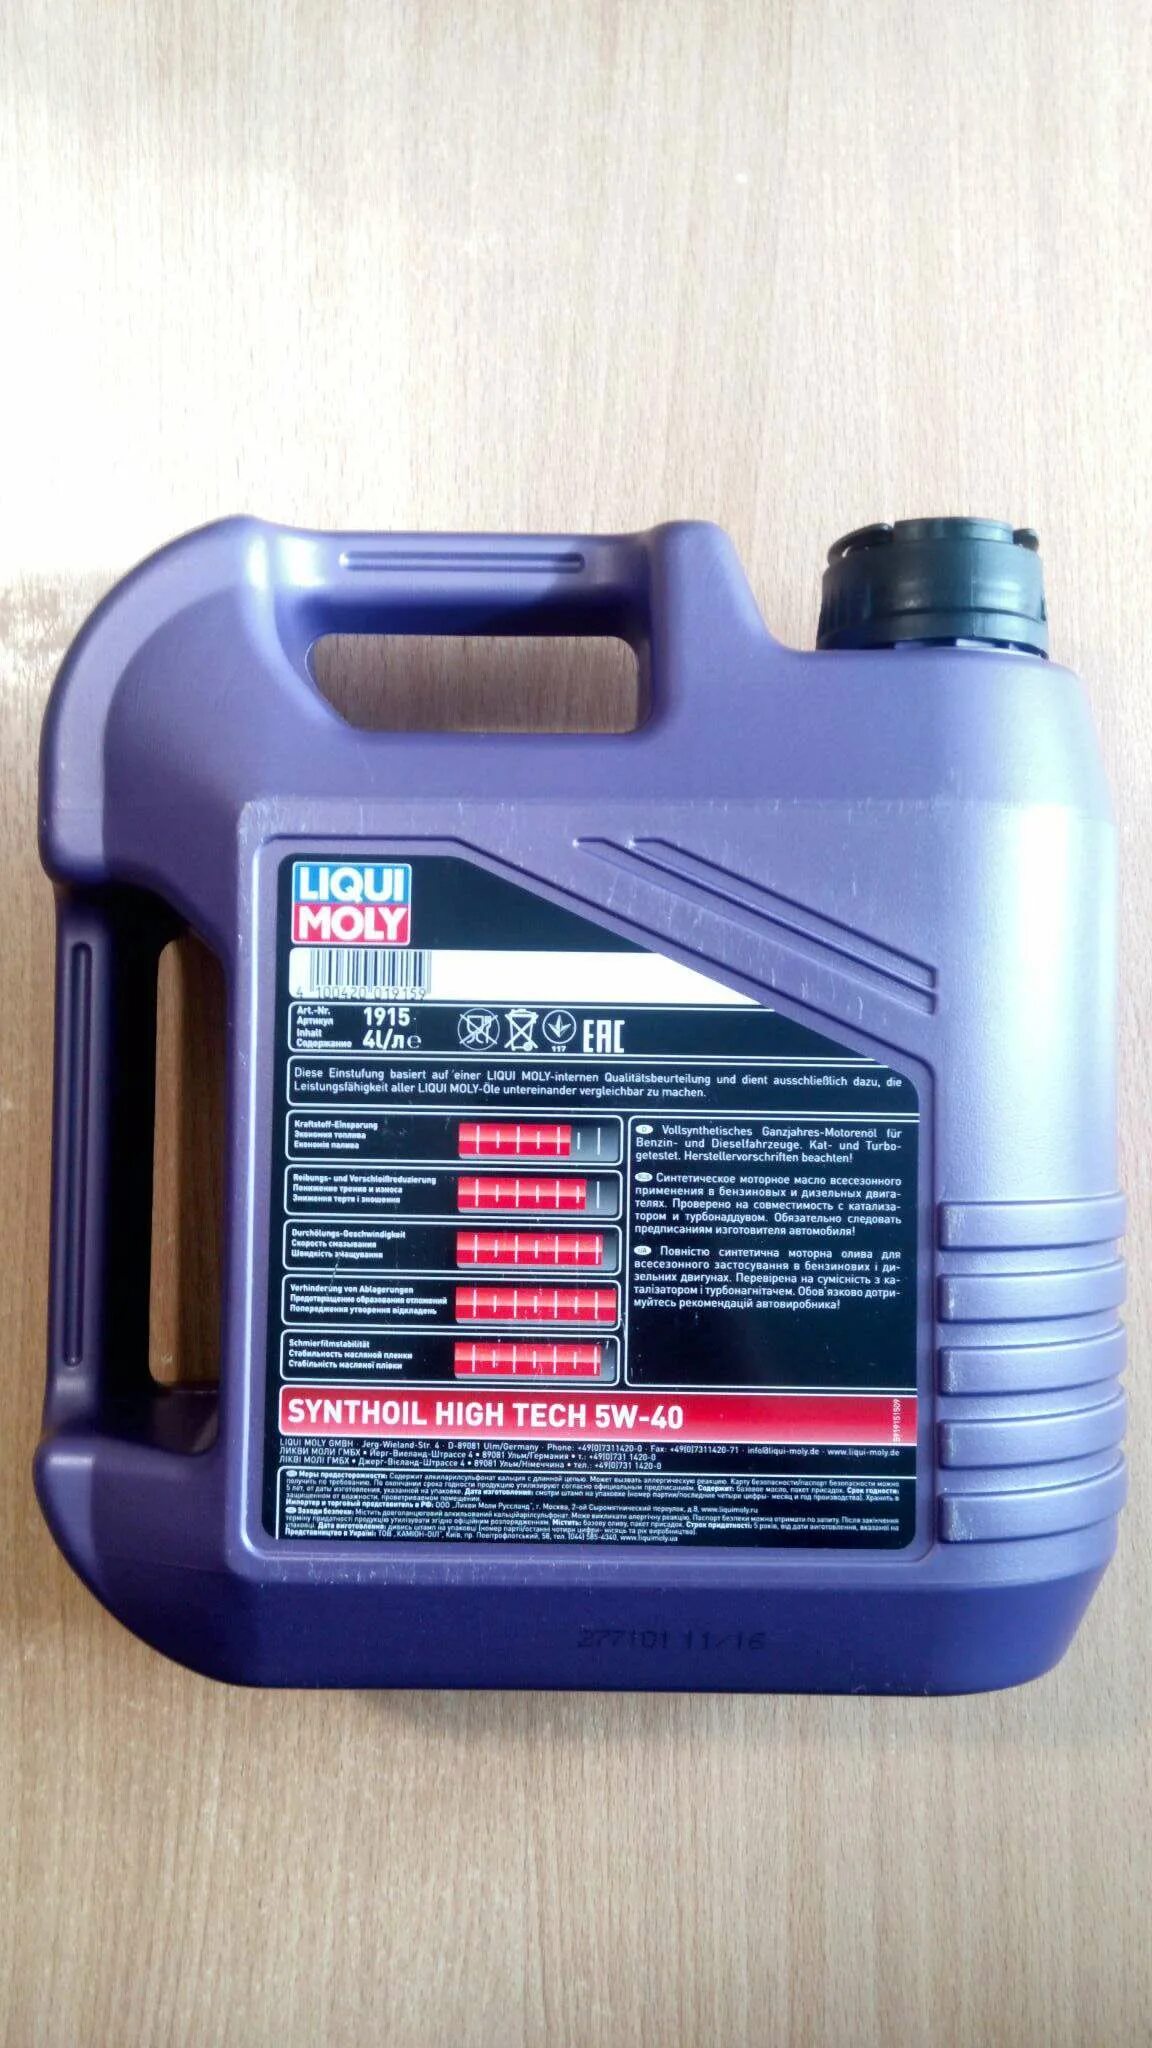 Масло моторное synthoil high tech. Liqui Moly 5w40 Synthoil. Liqui Moly 5w40 Synthoil High Tech 4л. Synthoil High Tech 5w-40 4 л. Масло Ликви моли 5w40 Synthoil High Tech.